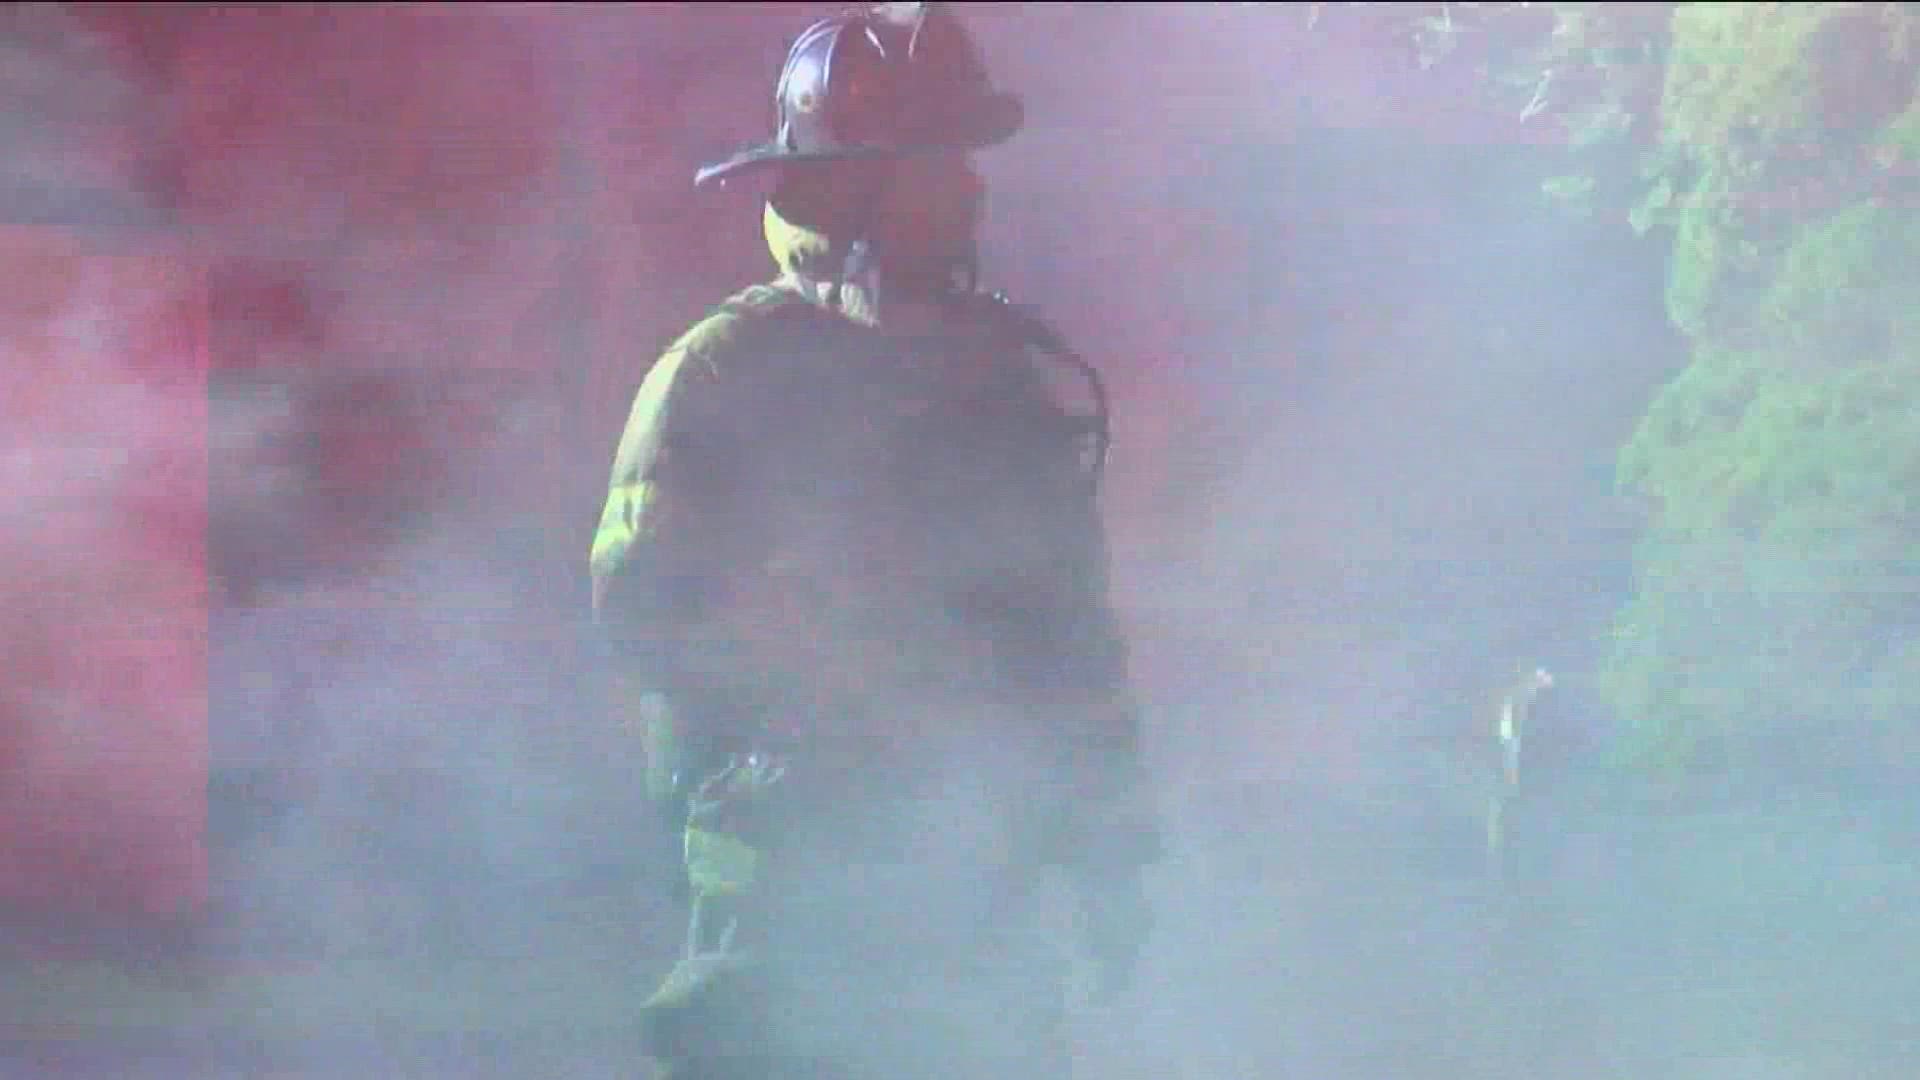 While the City of Toledo now compensates firefighters for occupational cancer, firefighters who have survived cancer have yet to receive retroactive compensation.